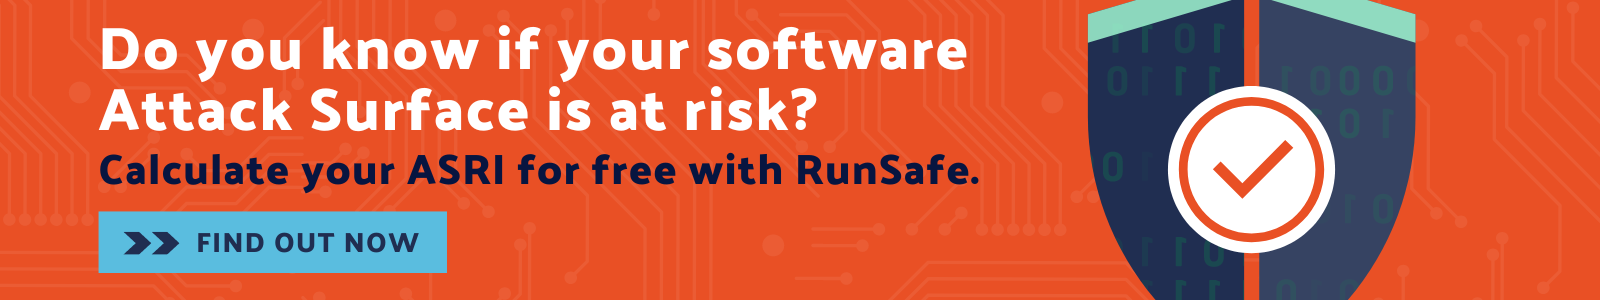 Calculate your ASRI for FREE with RunSafe Security